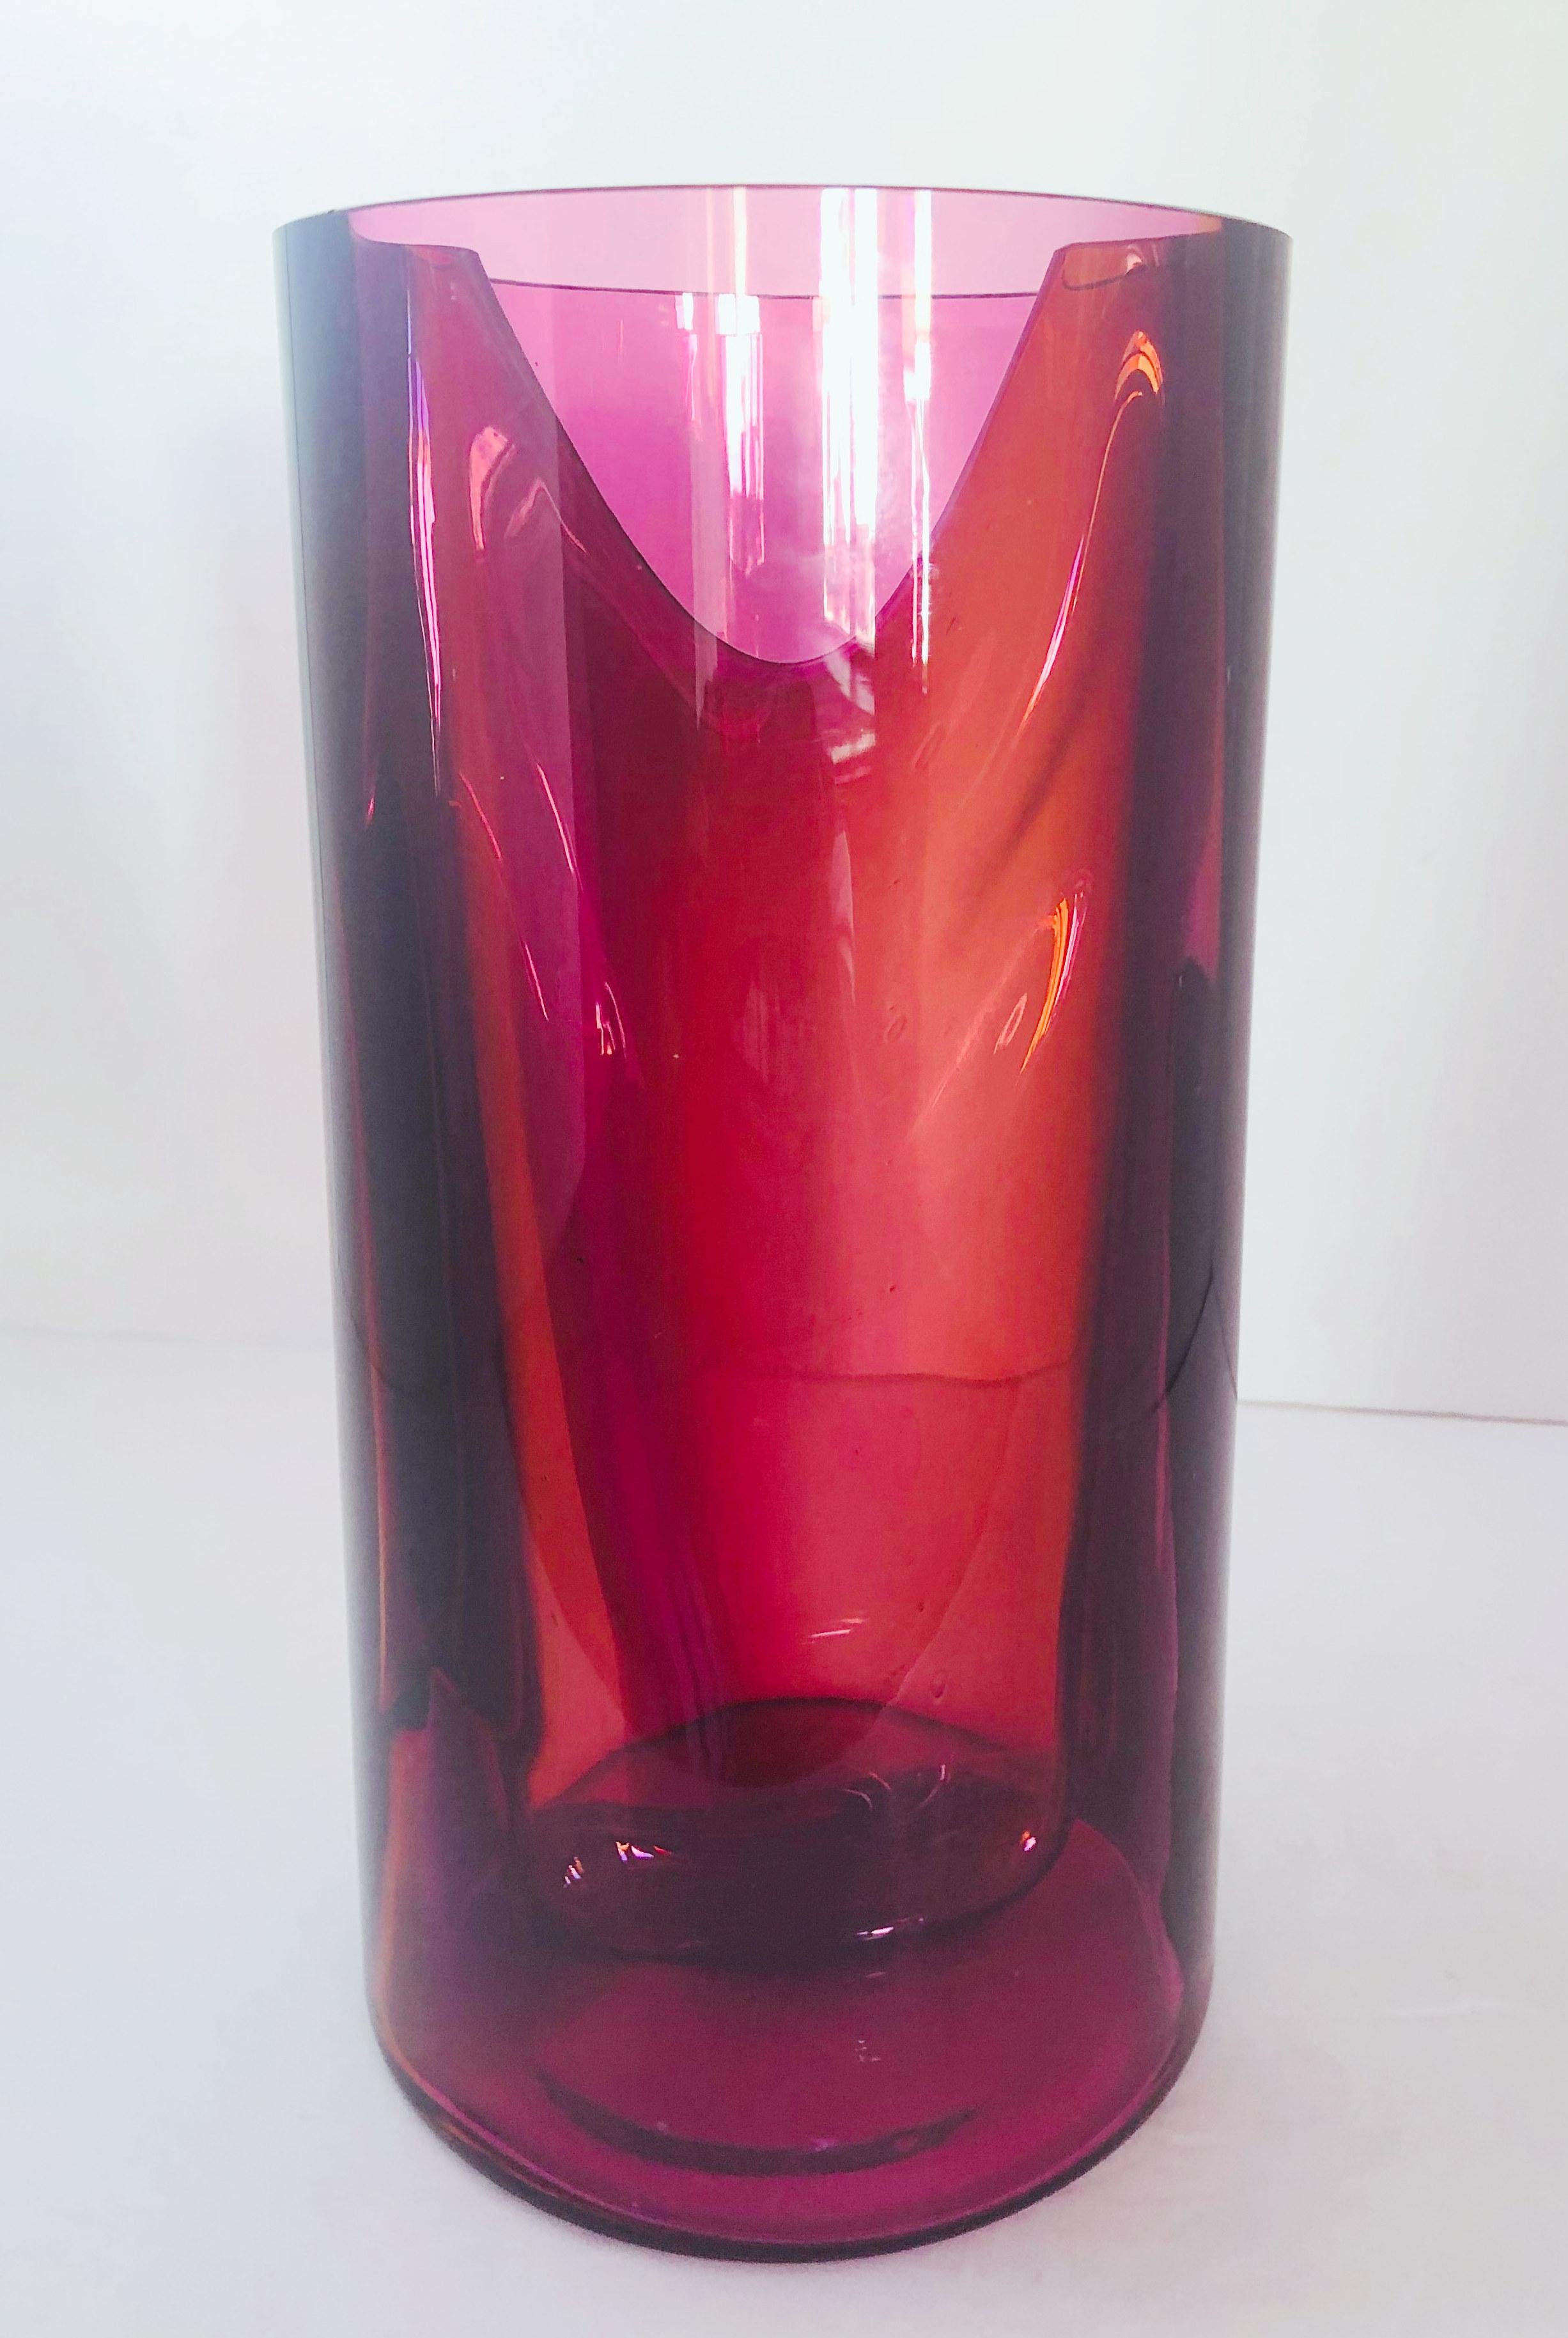 Vintage Italian dark amethyst Murano glass vase hand blown into two separate sections with a divider in the middle Made in Italy circa 1960s
Height: 12 inches / Diameter: 6 inches
1 in stock in Palm Springs currently ON 40% OFF SALE for $899